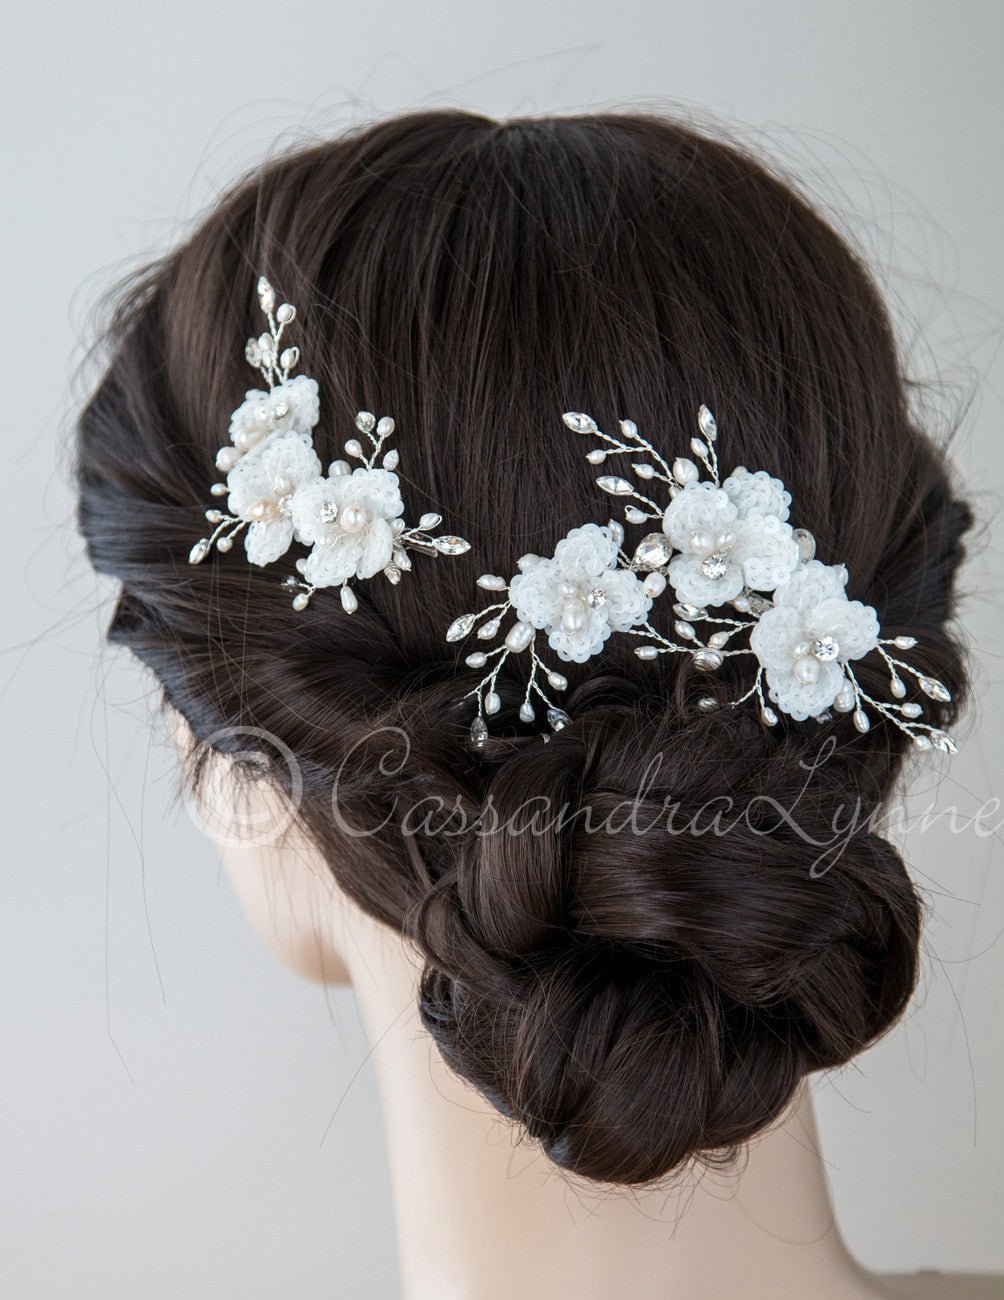 Bridal Clip Set of Sequin Flowers and Pearls - Cassandra Lynne